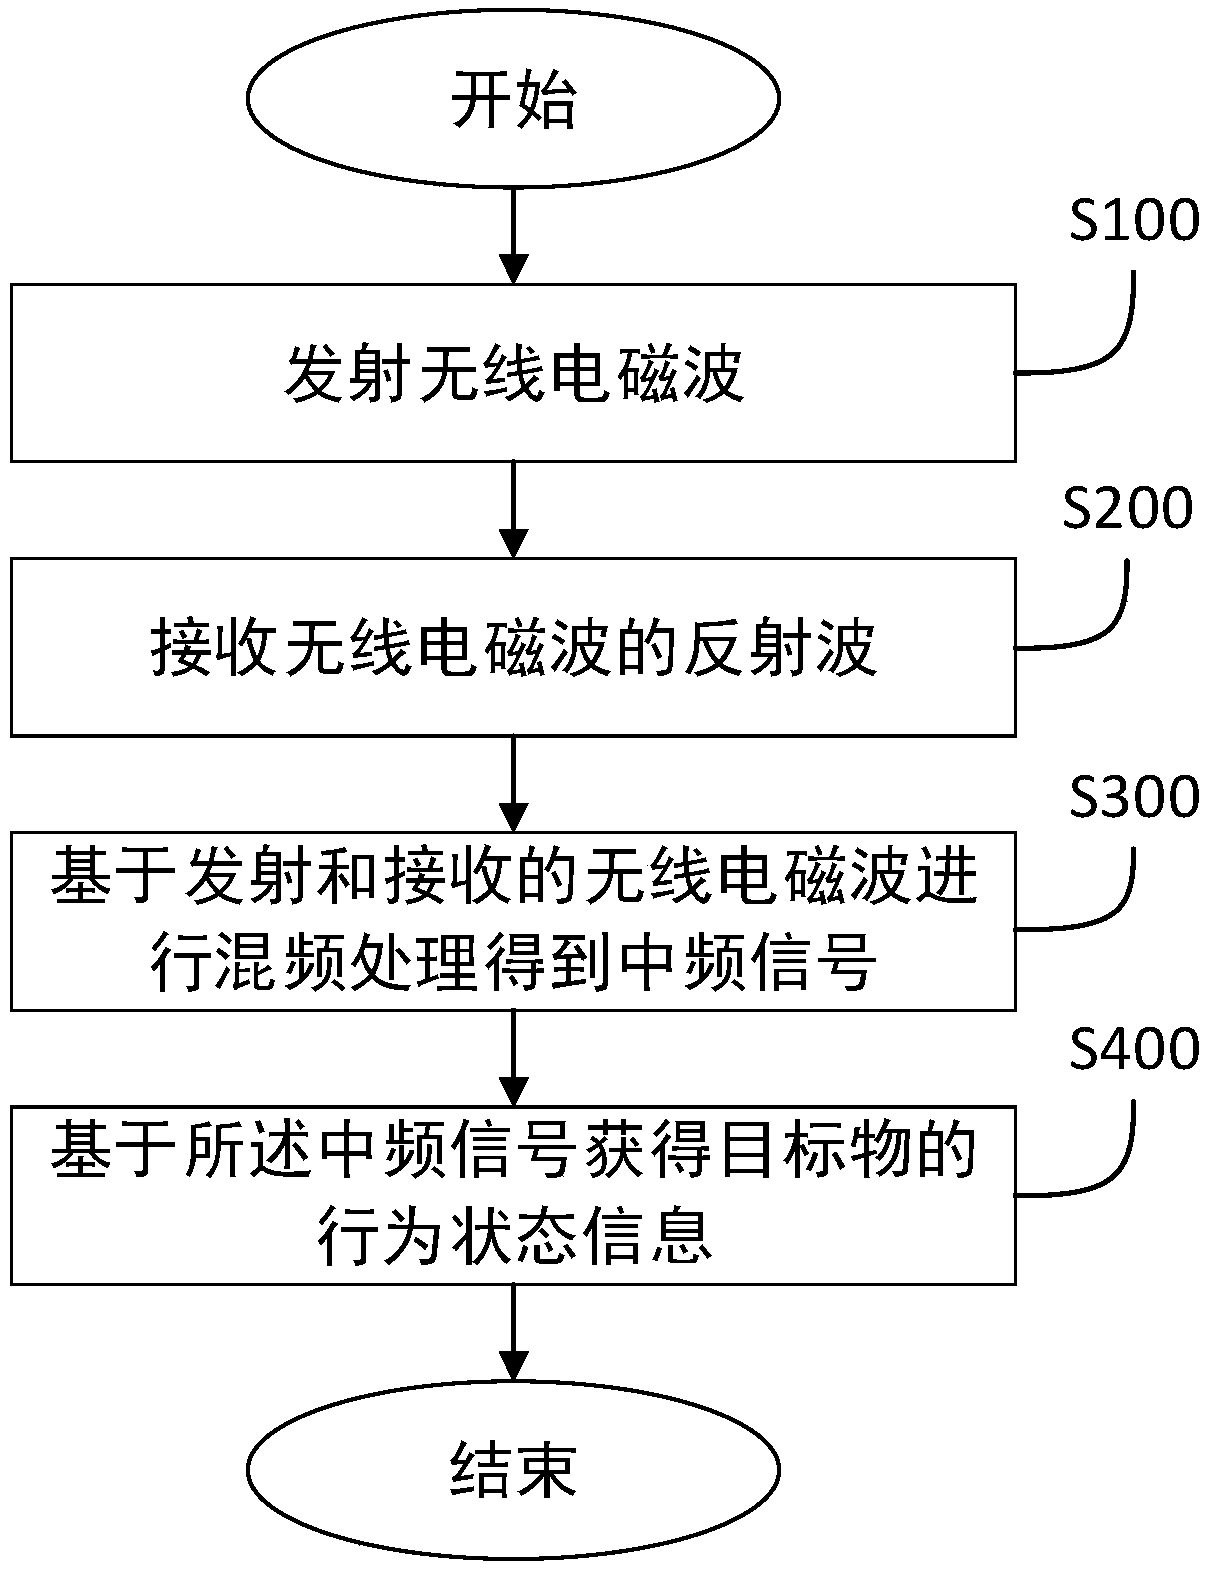 Behavior state detection device and method